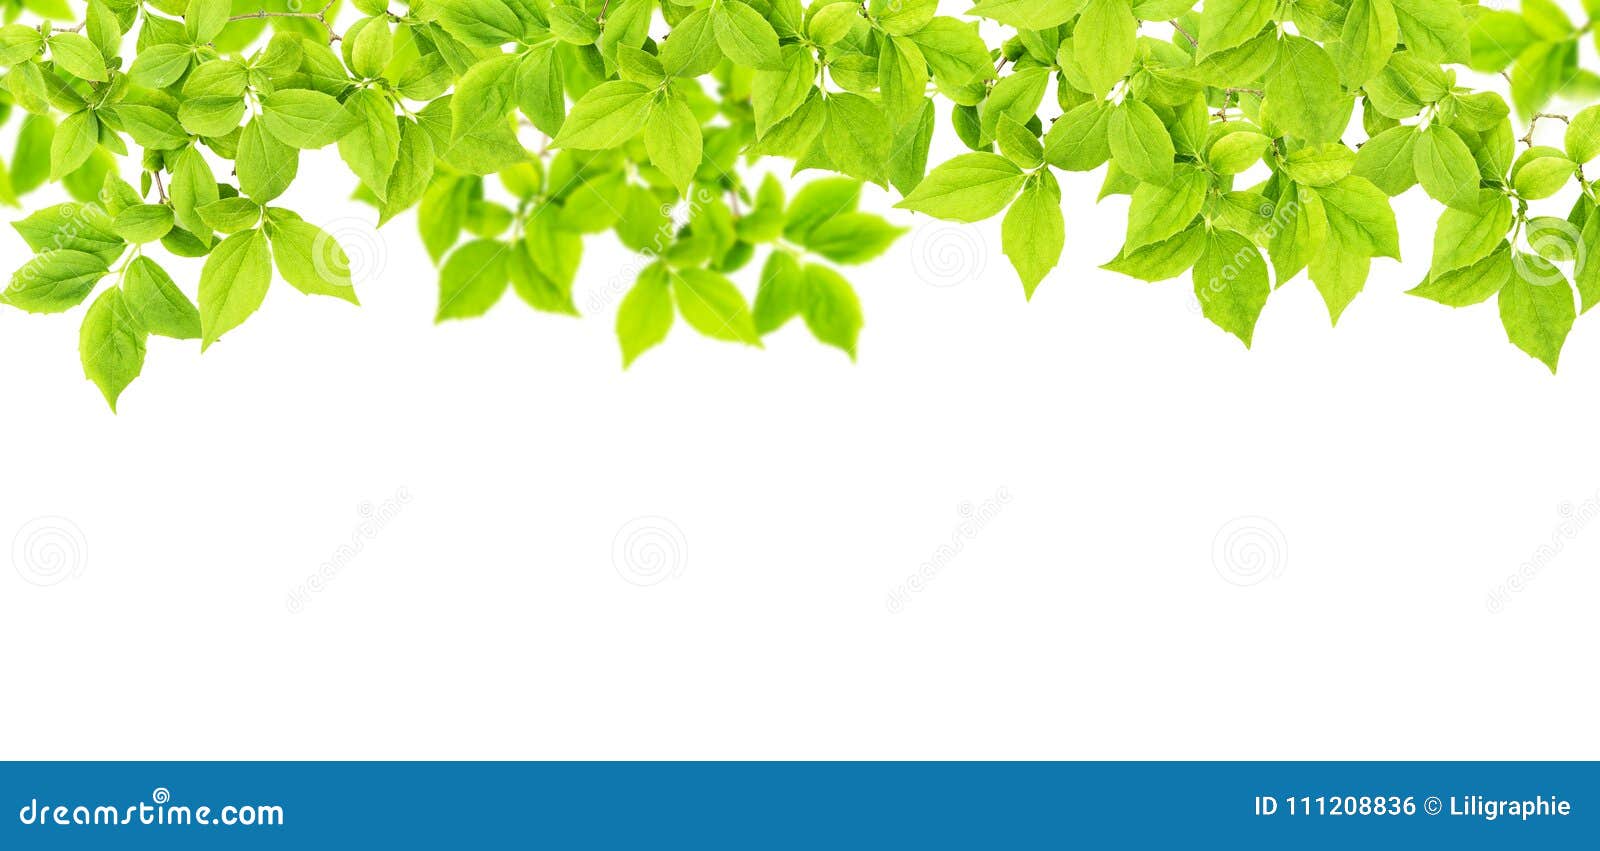  Green  Leaves  White Background Floral Banner  Stock Photo 